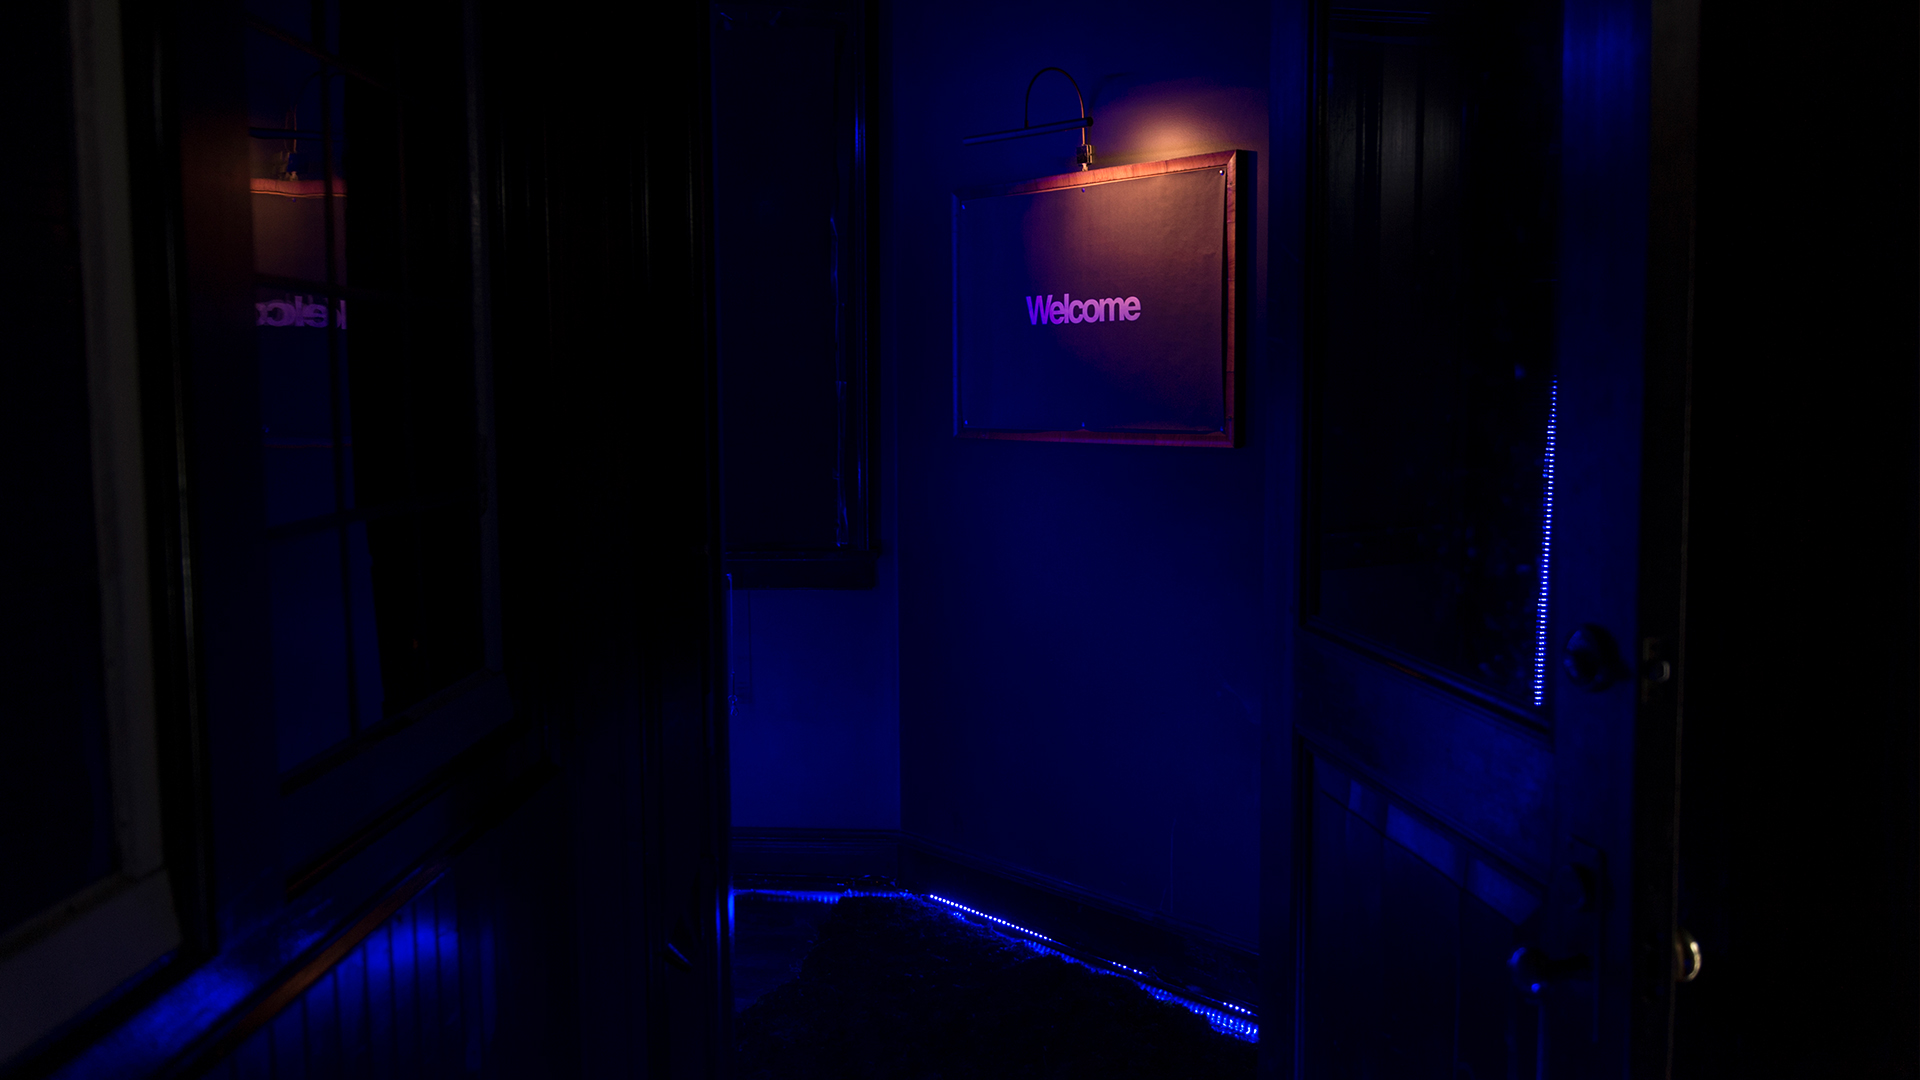 Dark entryway with deep blue lighting and Welcome sign on wall